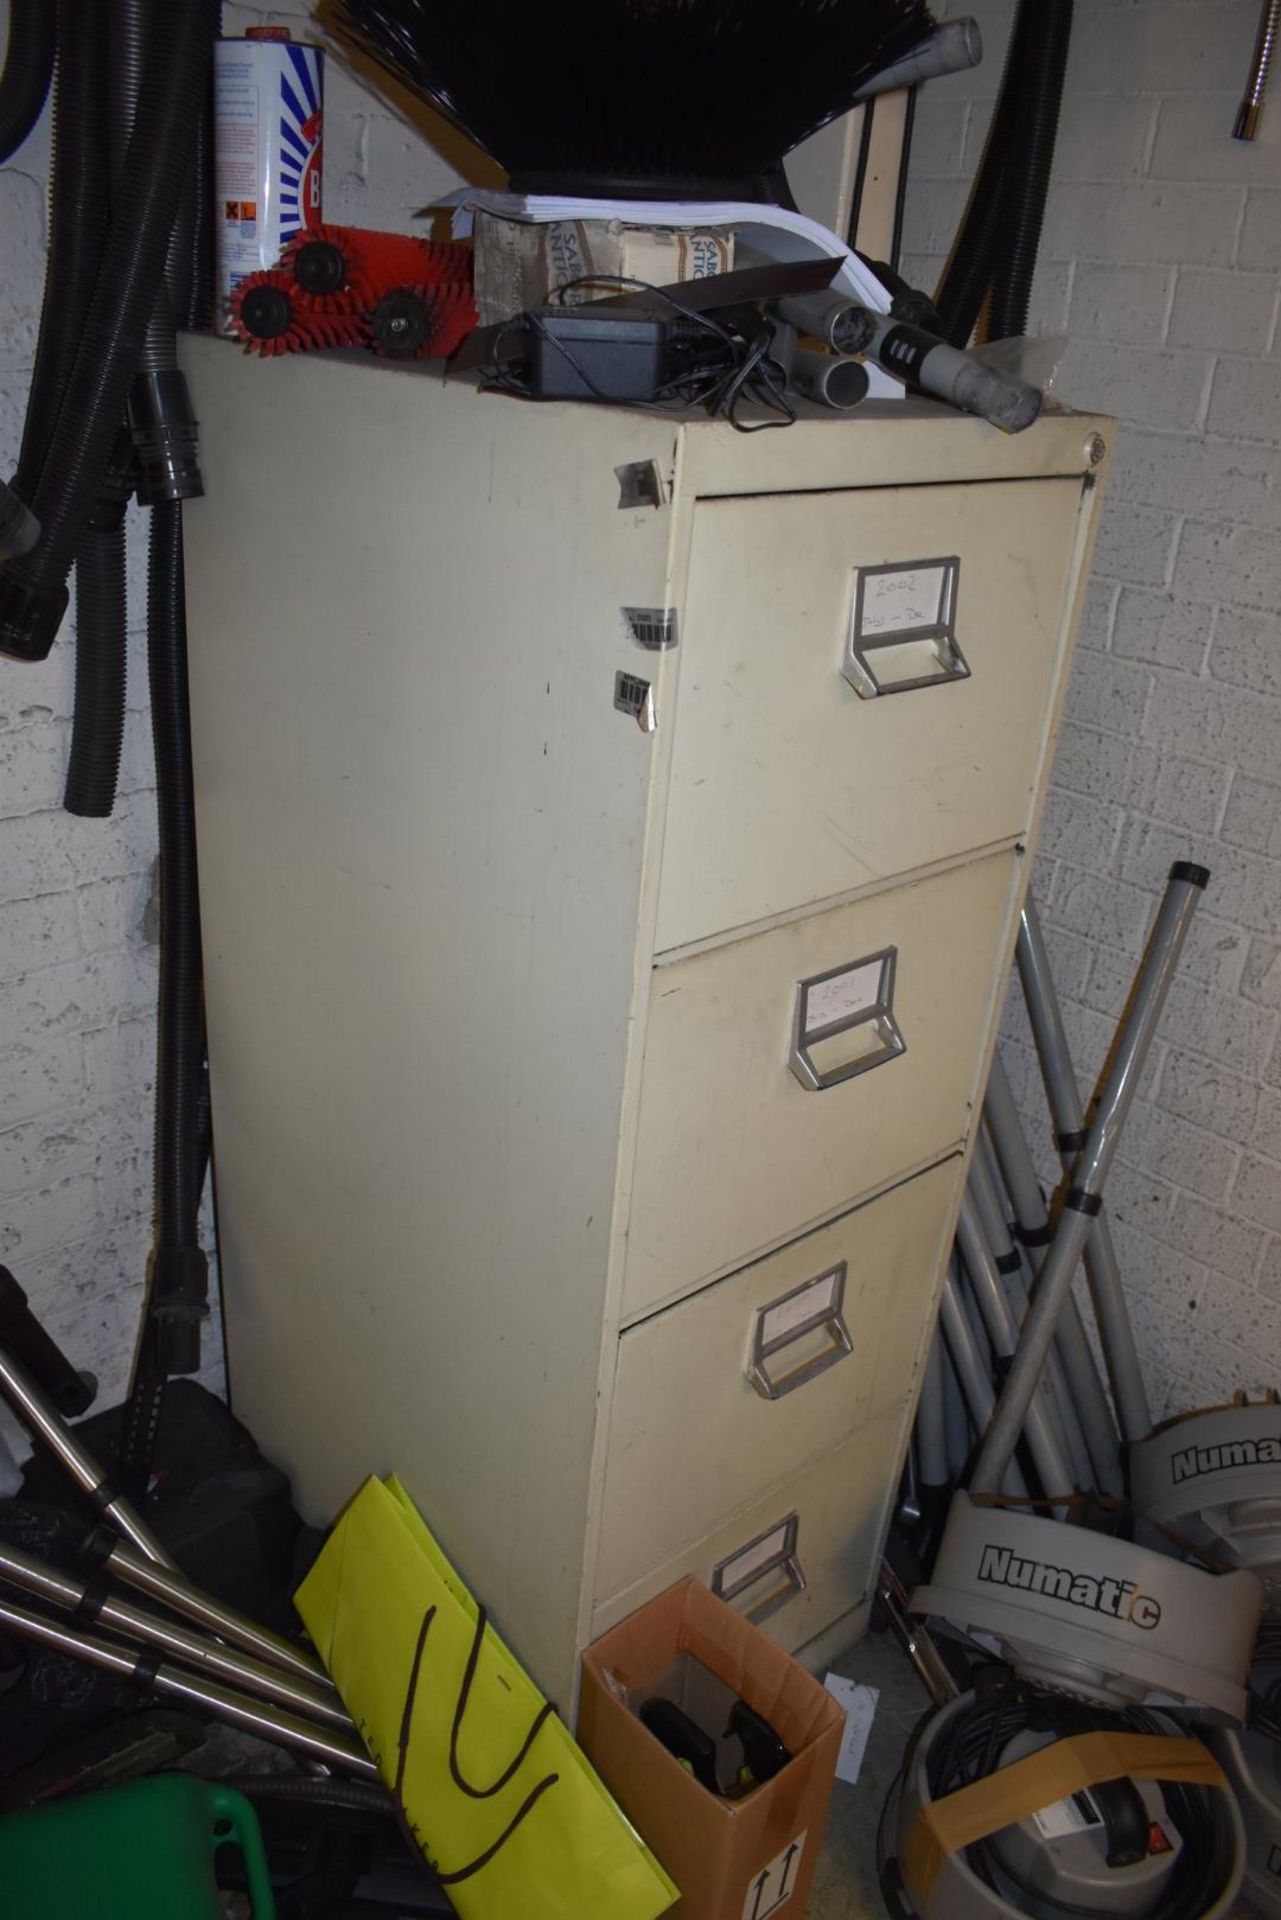 1 x Assorted Lot of Office Furniture - Includes Two Desks, 1 x Table, 1 x Filing Cabinet and 2 x - Image 2 of 3